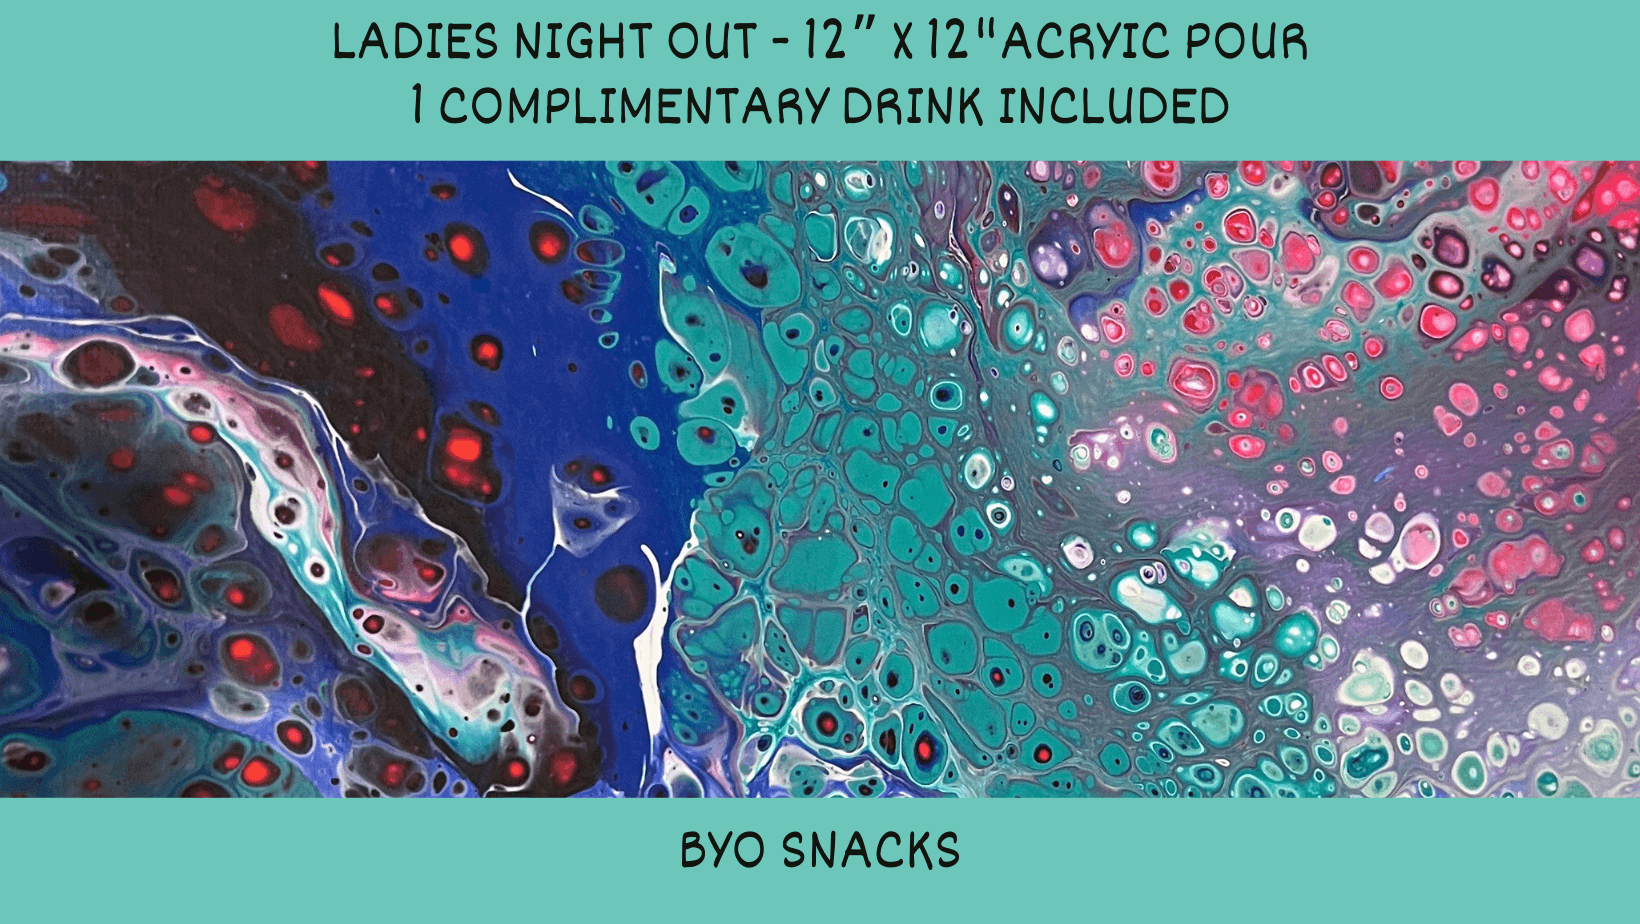 Ladies Night Out- Acrylic Pour